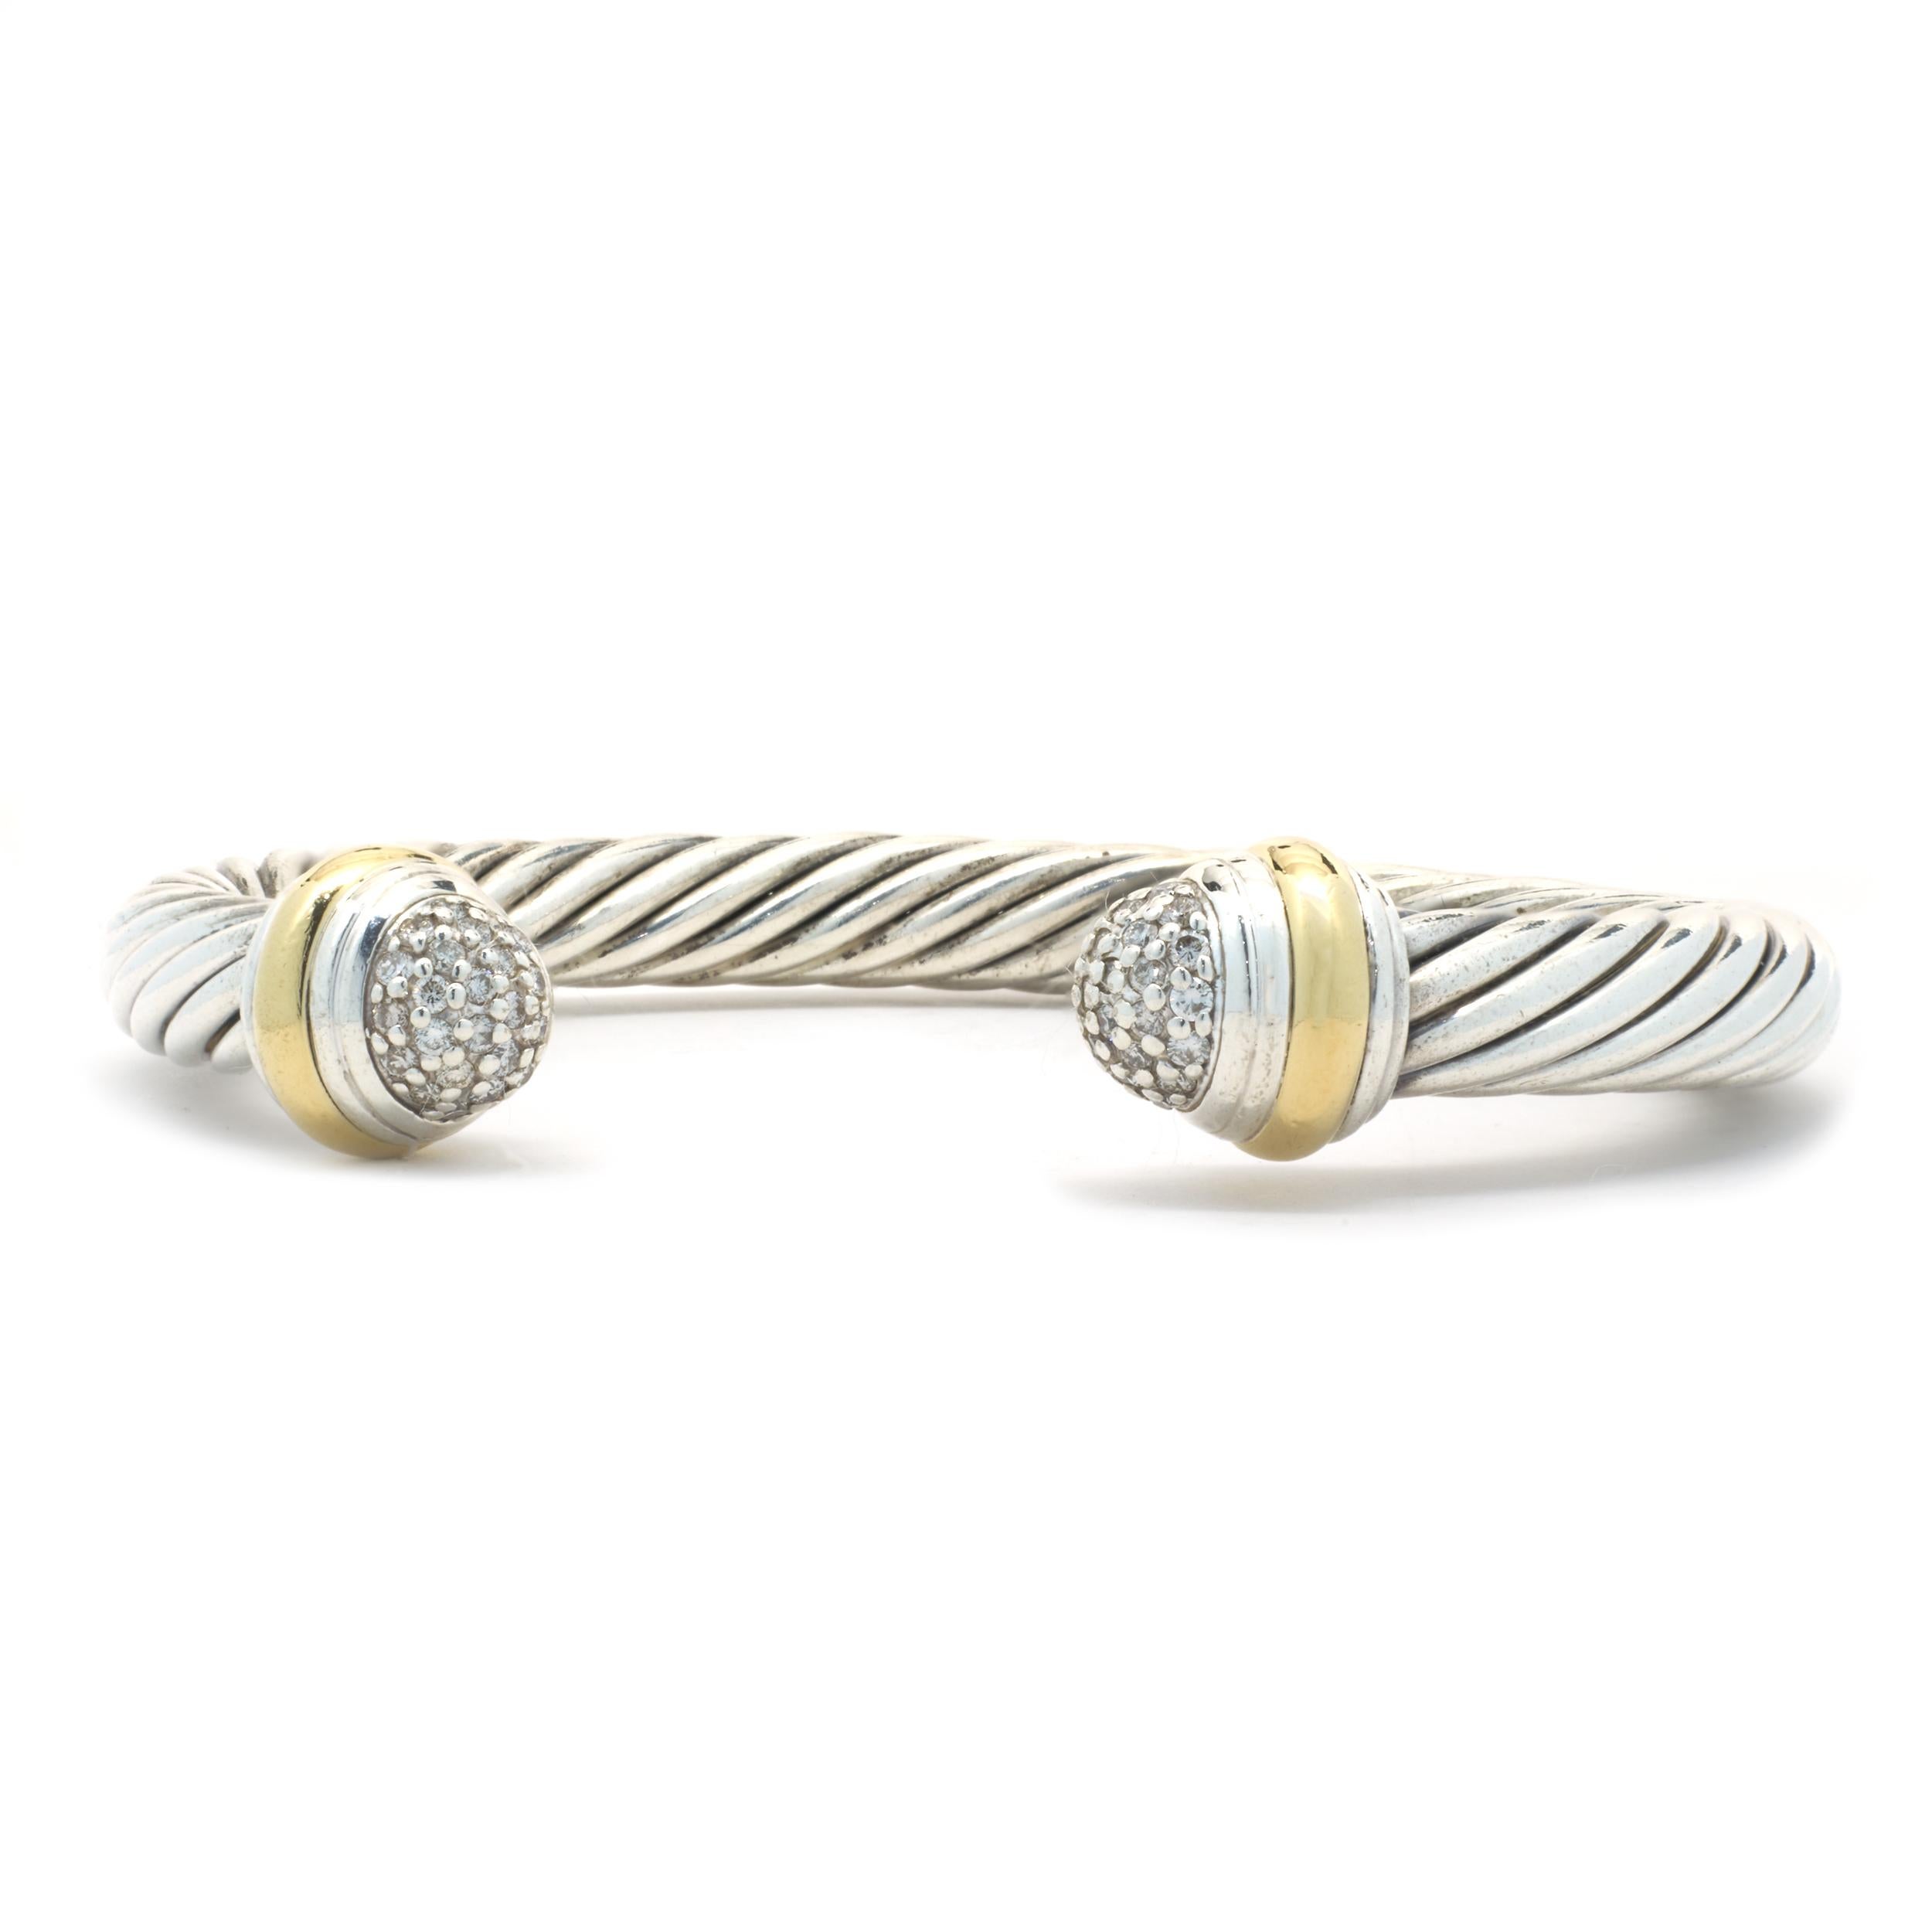 Designer: David Yurman
Material: sterling silver & 18K yellow gold
Diamonds: 40 round cut = .49cttw
Color: G
Clarity: SI1-2
Weight: 42.02 grams
